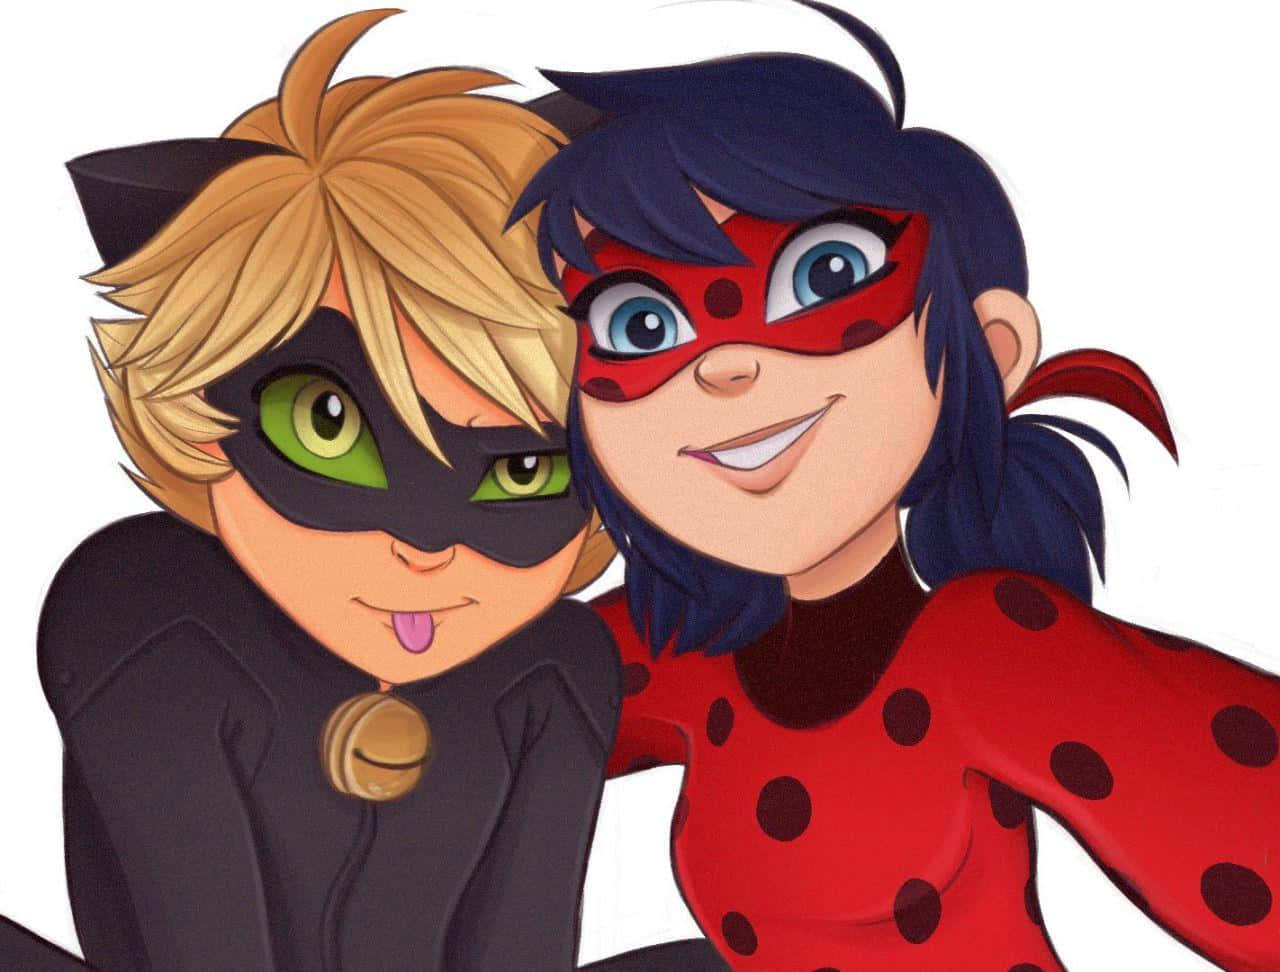 Adrien and Marinette, the superheroes of Paris